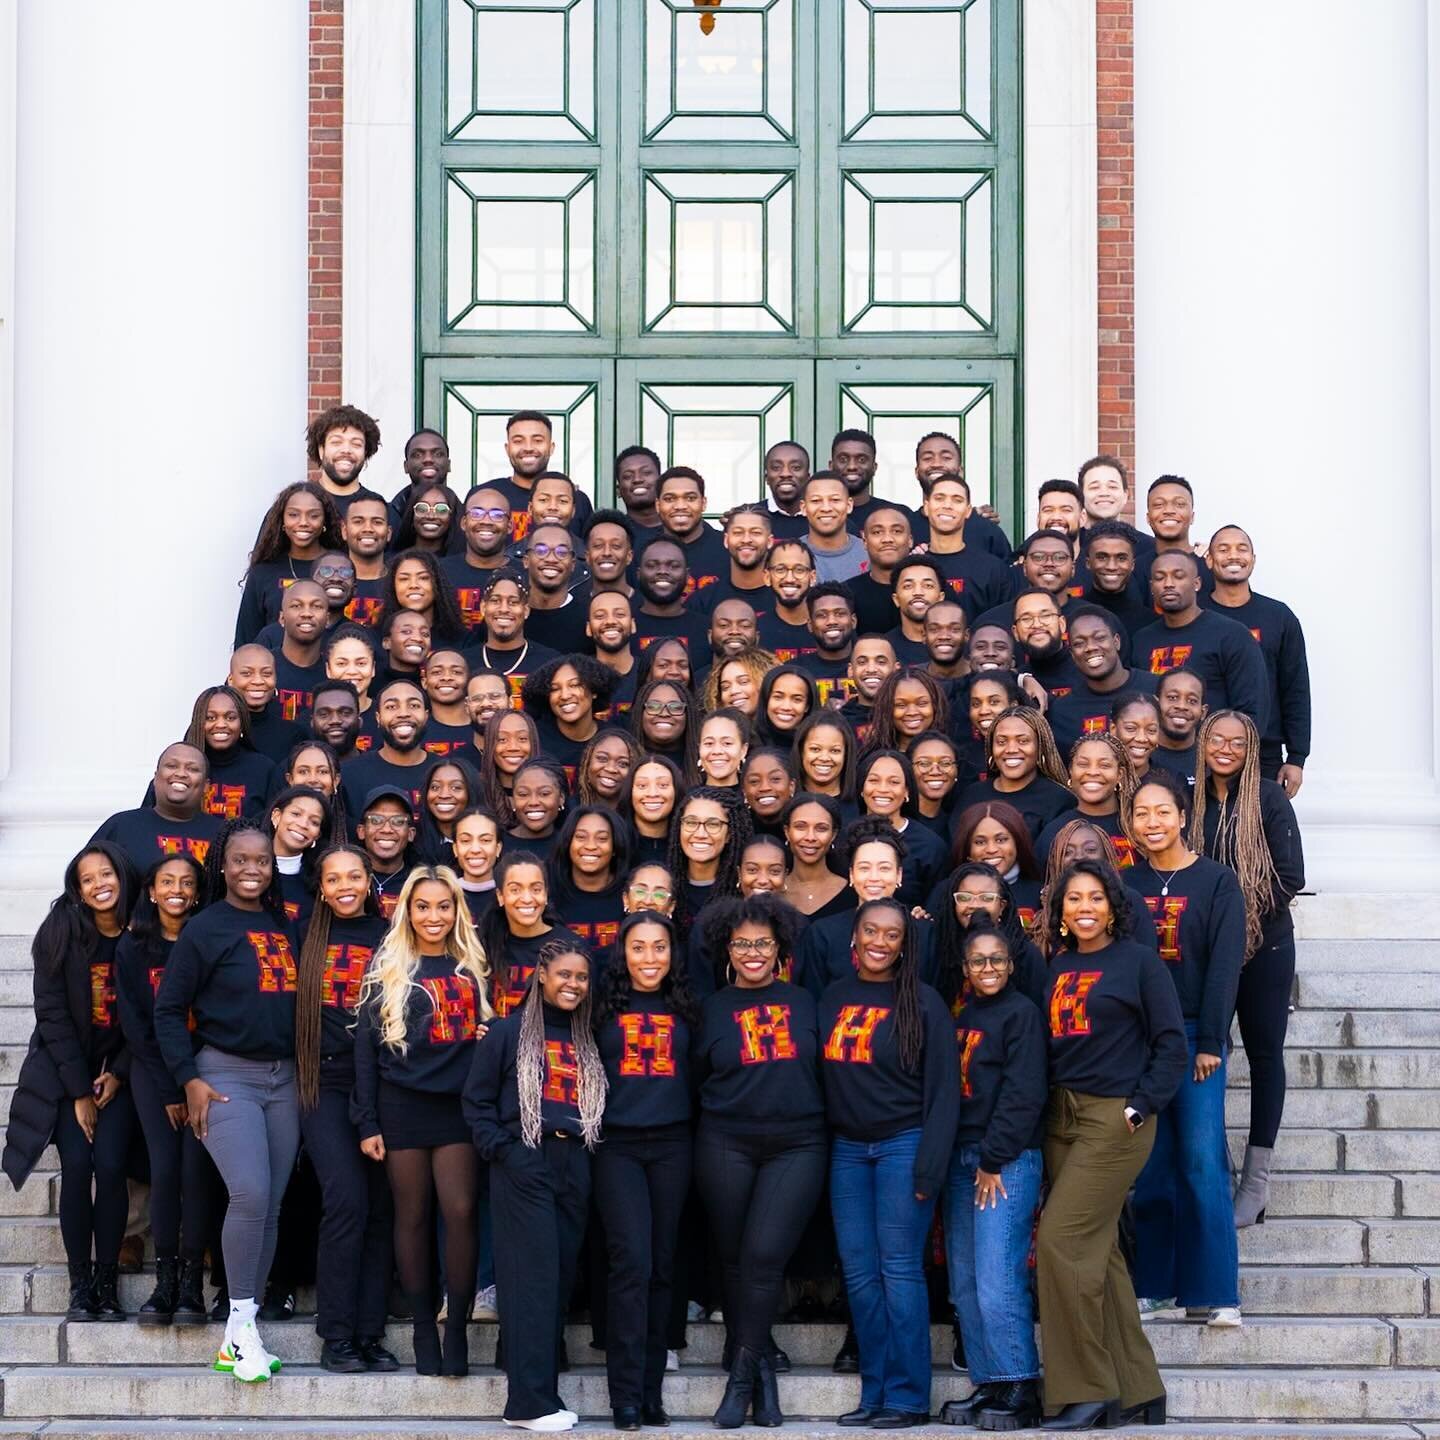 The African American Student Union at Harvard Business School.

During Black History Month EC and RC AASU members took part in a photoshoot on the steps of Baker Library.

📸: @zoumaniphotos